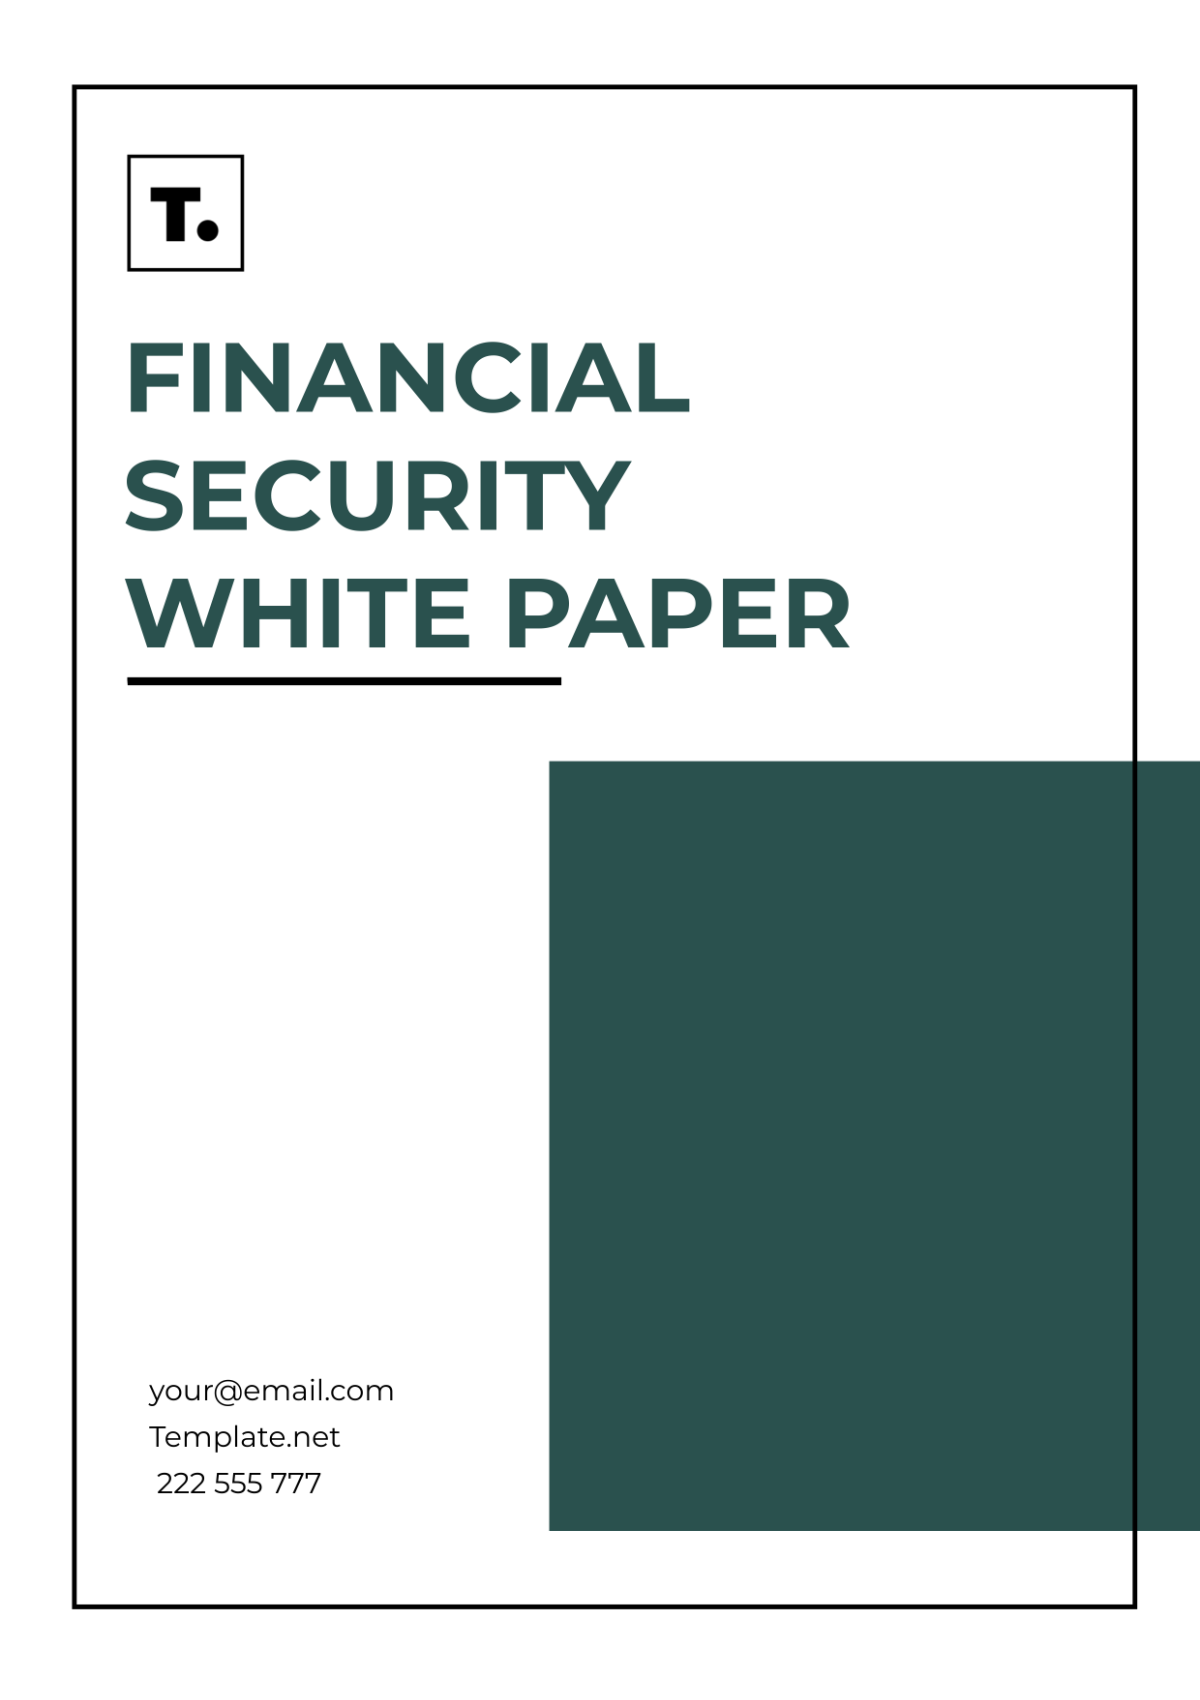 Financial Security White Paper Template